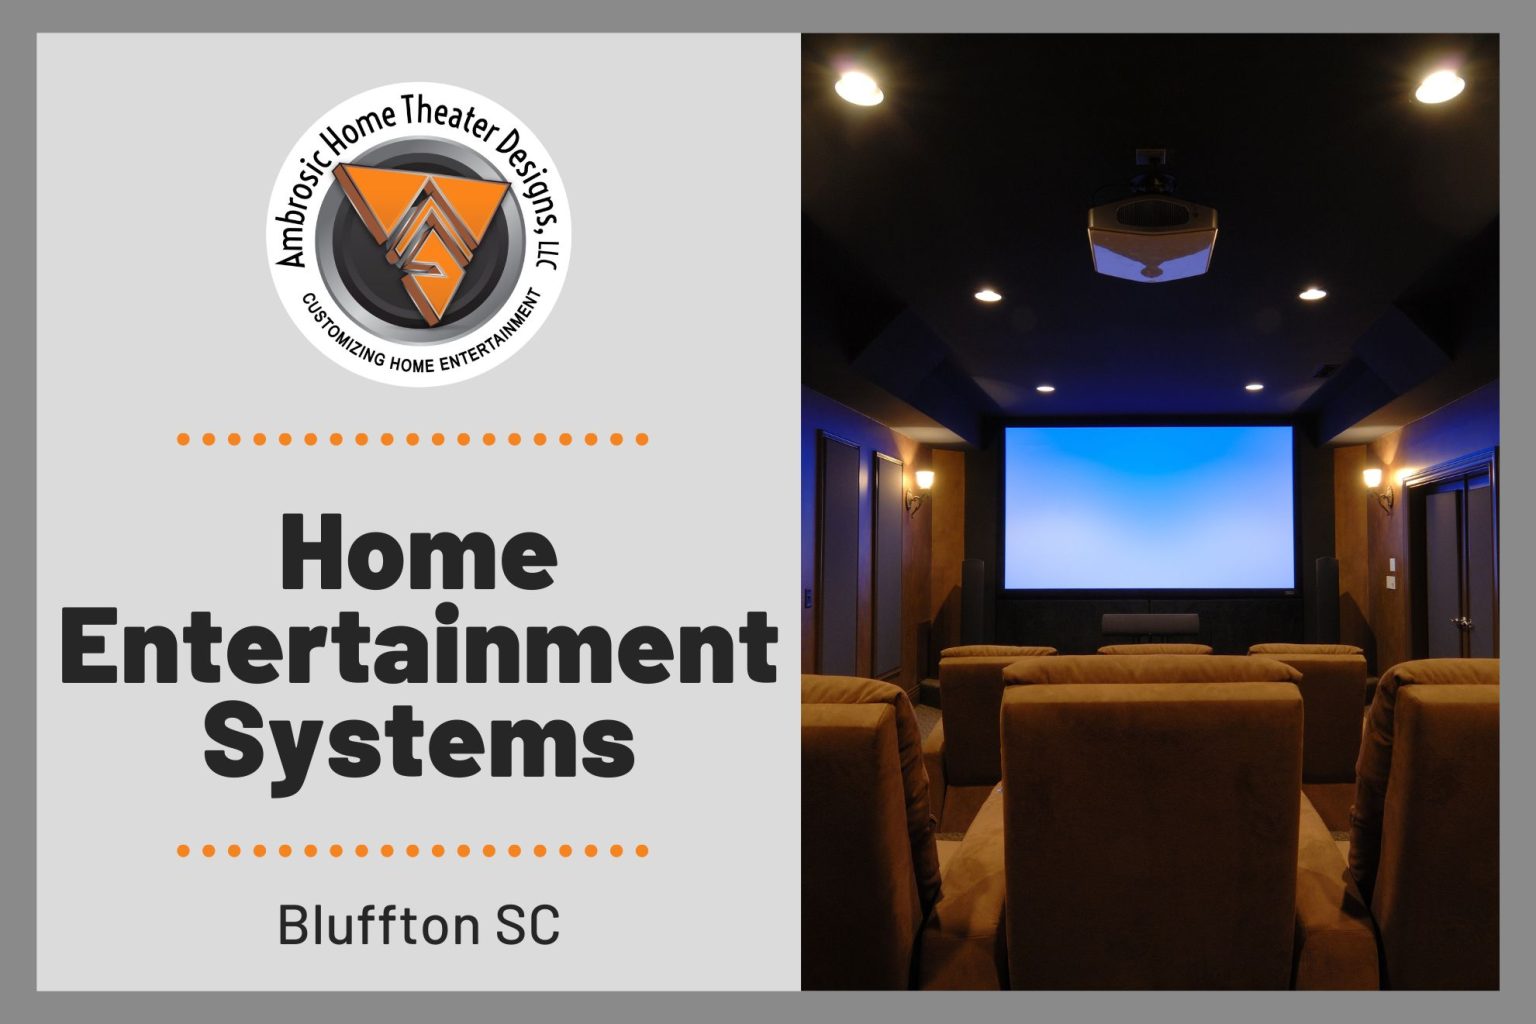 Home Entertainment Systems in Bluffton SC